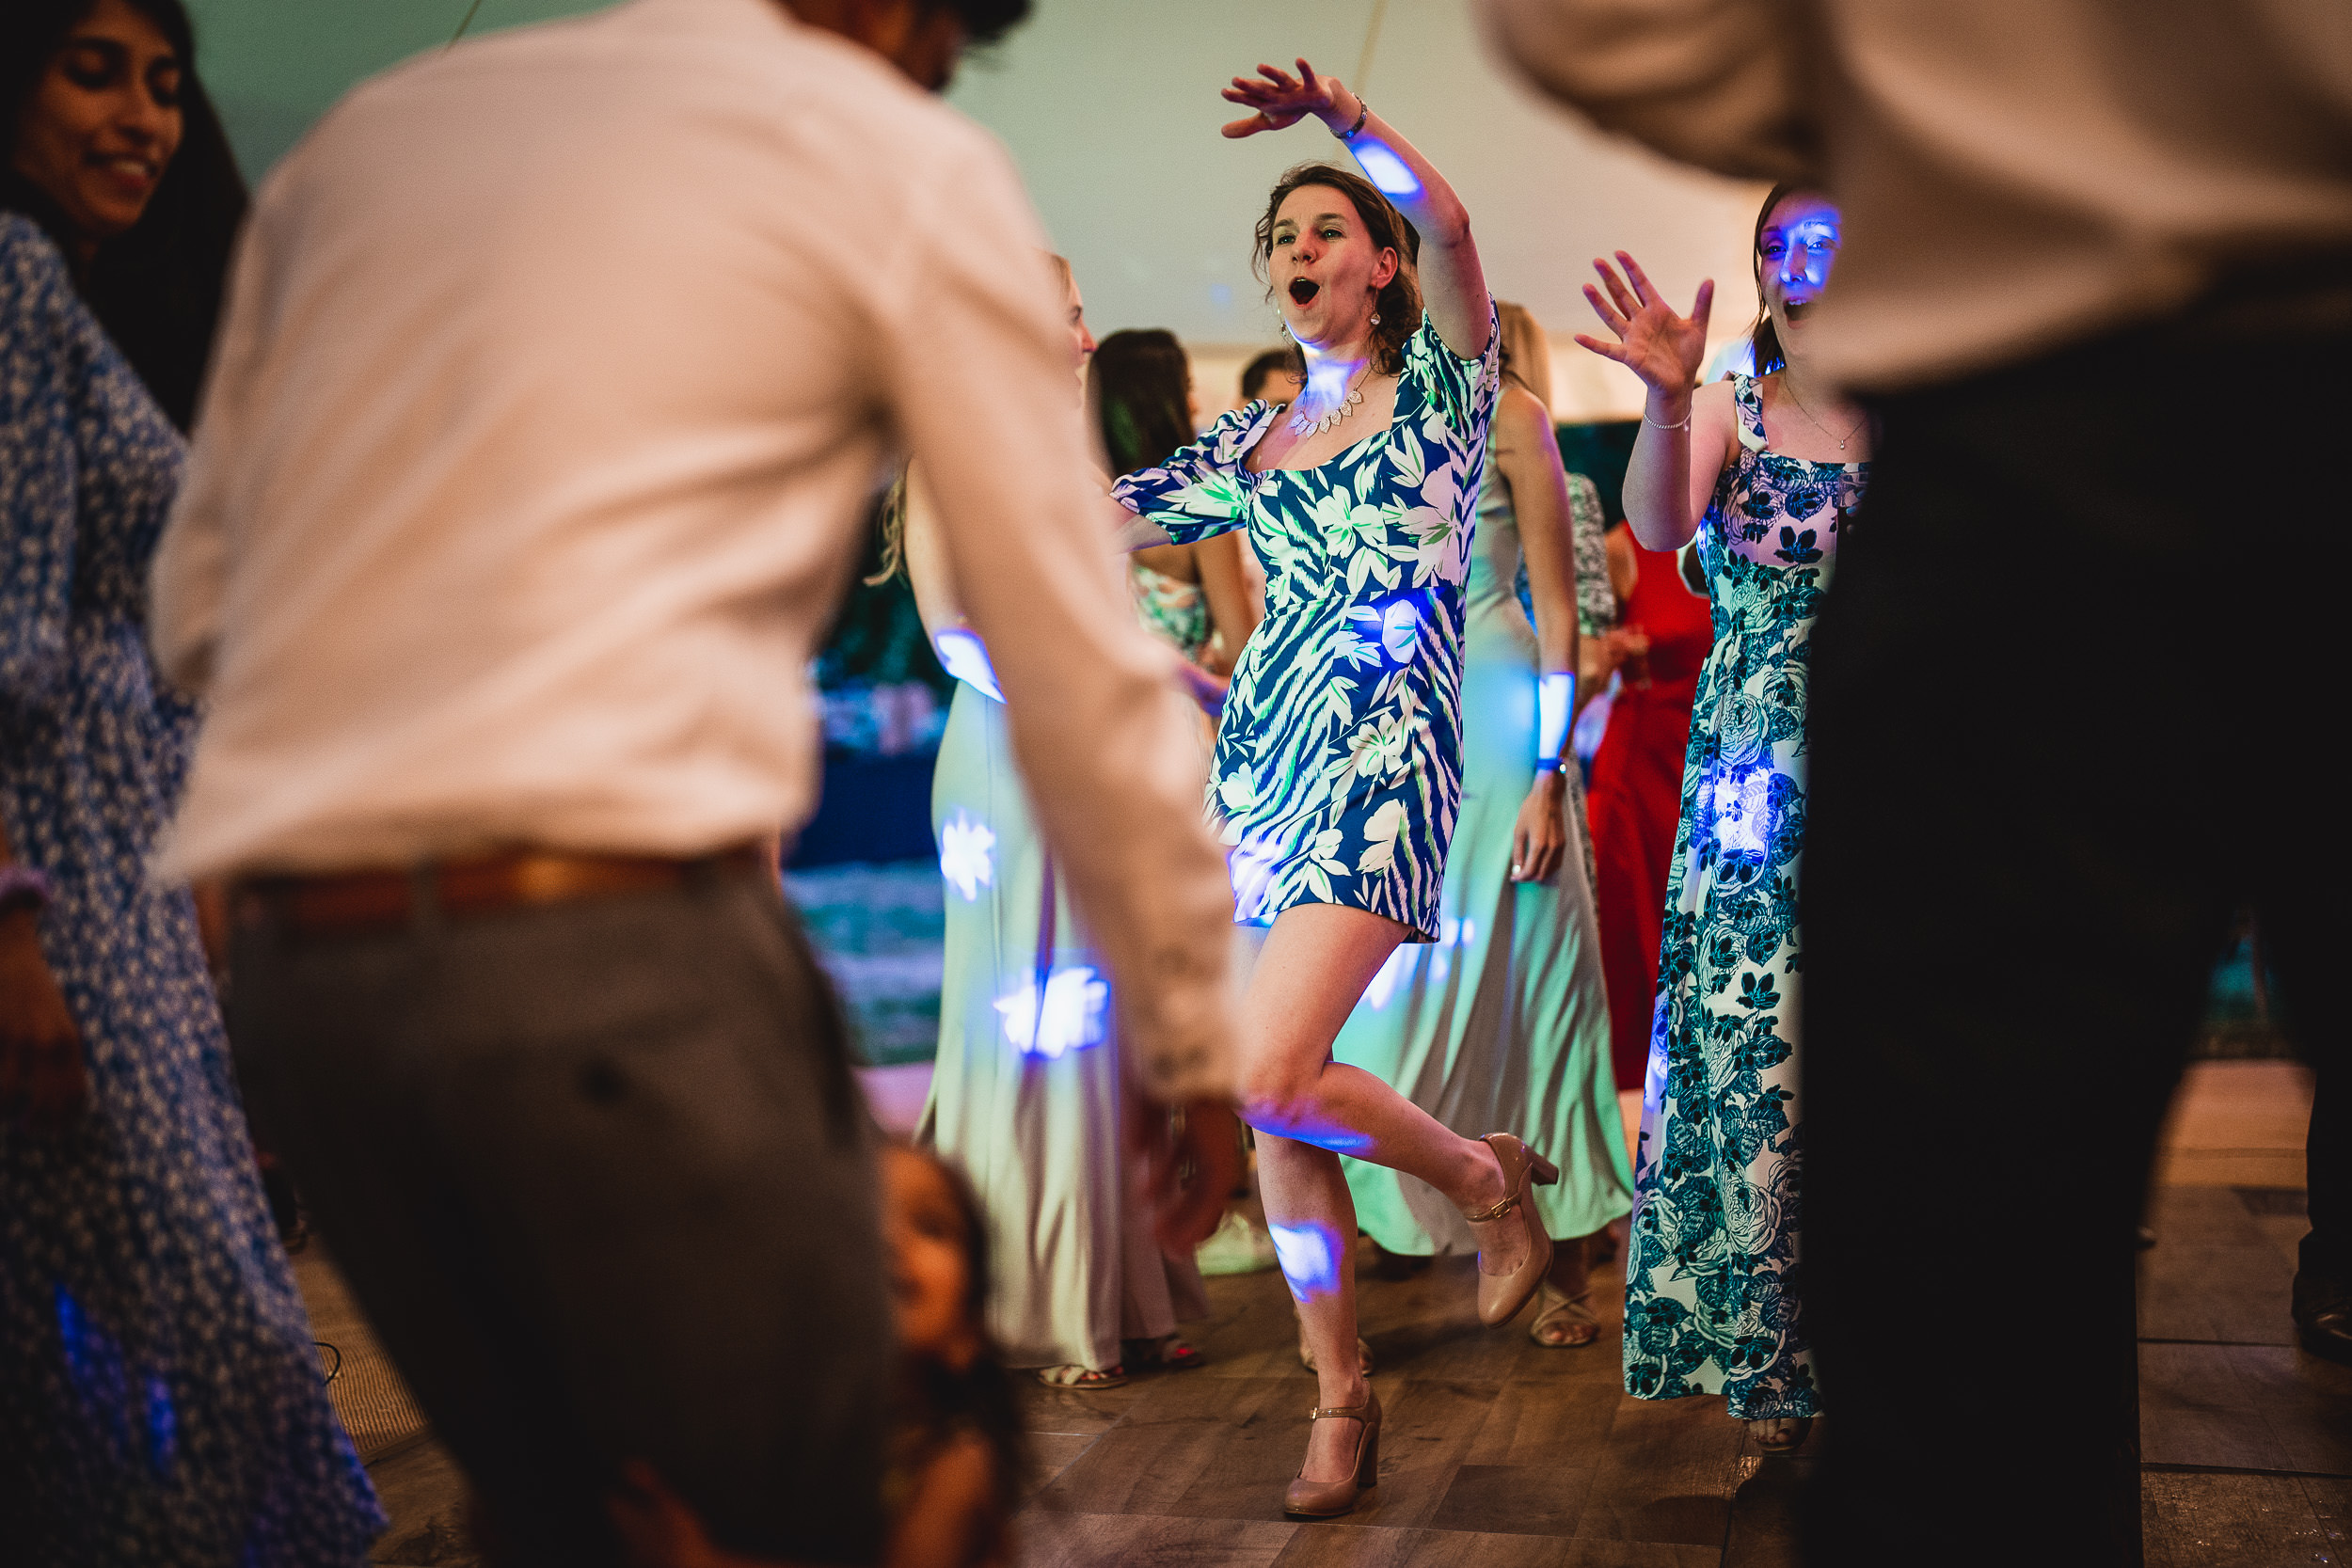 A wedding photographer capturing the bride and guests dancing on the dance floor.